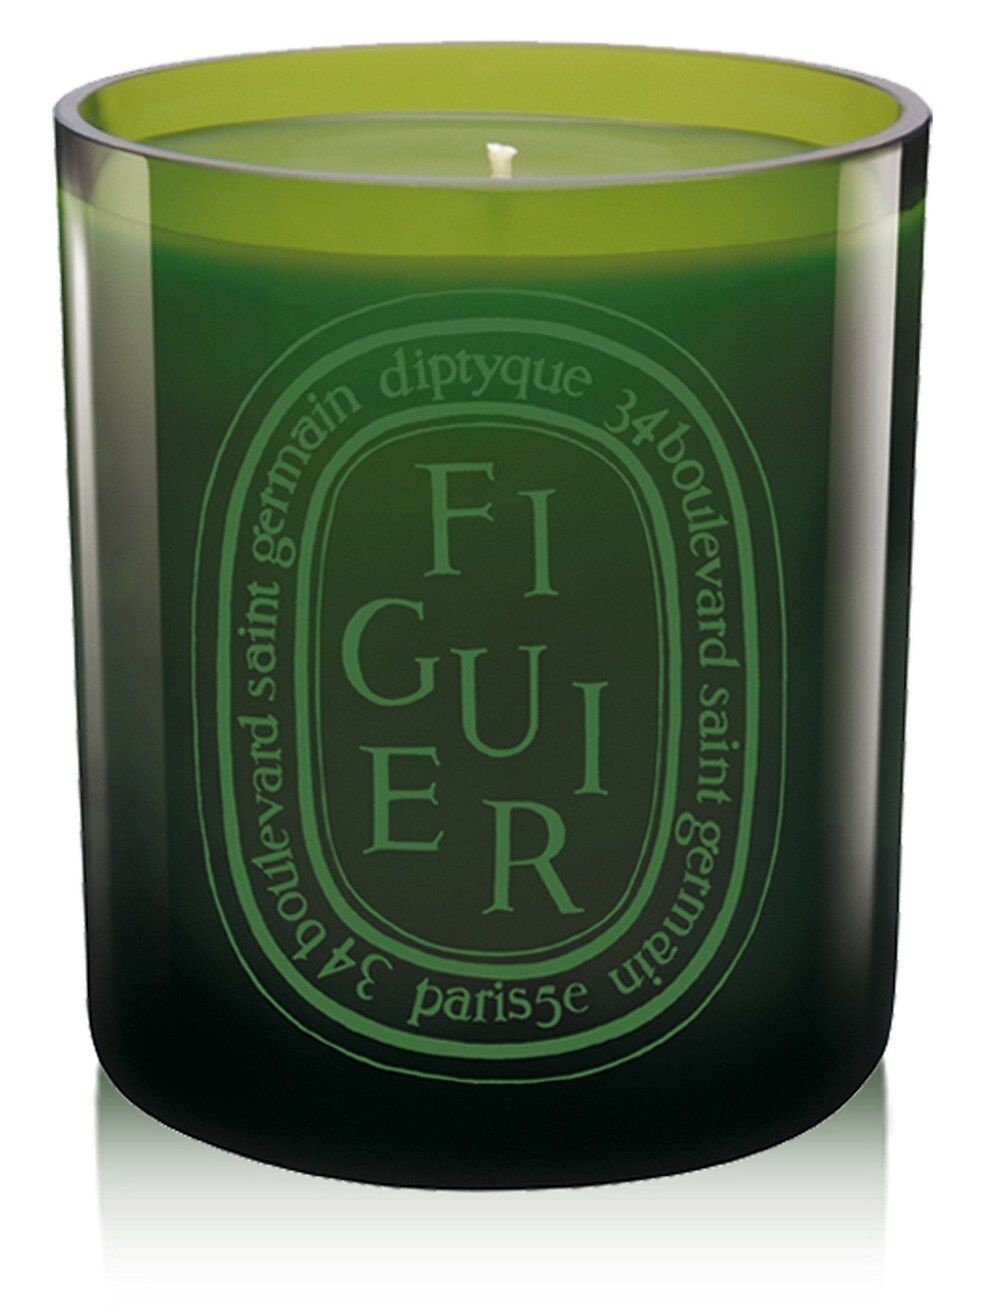 Diptyque Green Figuier Candle | Saks Fifth Avenue